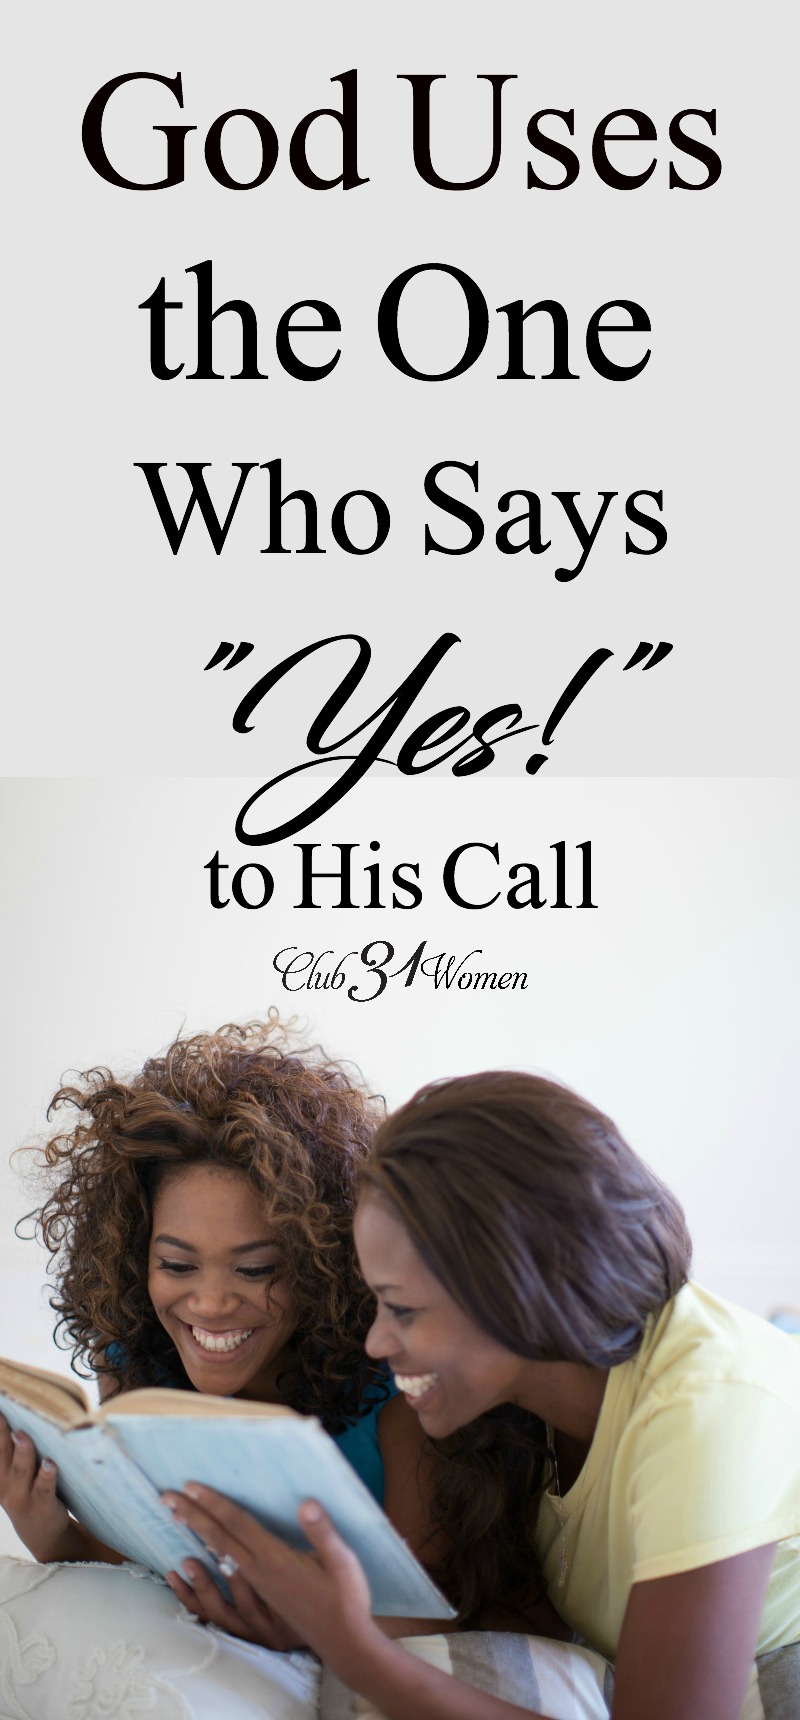 God isn't looking for perfect people to do His will. He's looking for those who make themselves available to say "Yes" when He calls. Even our children... via @Club31Women